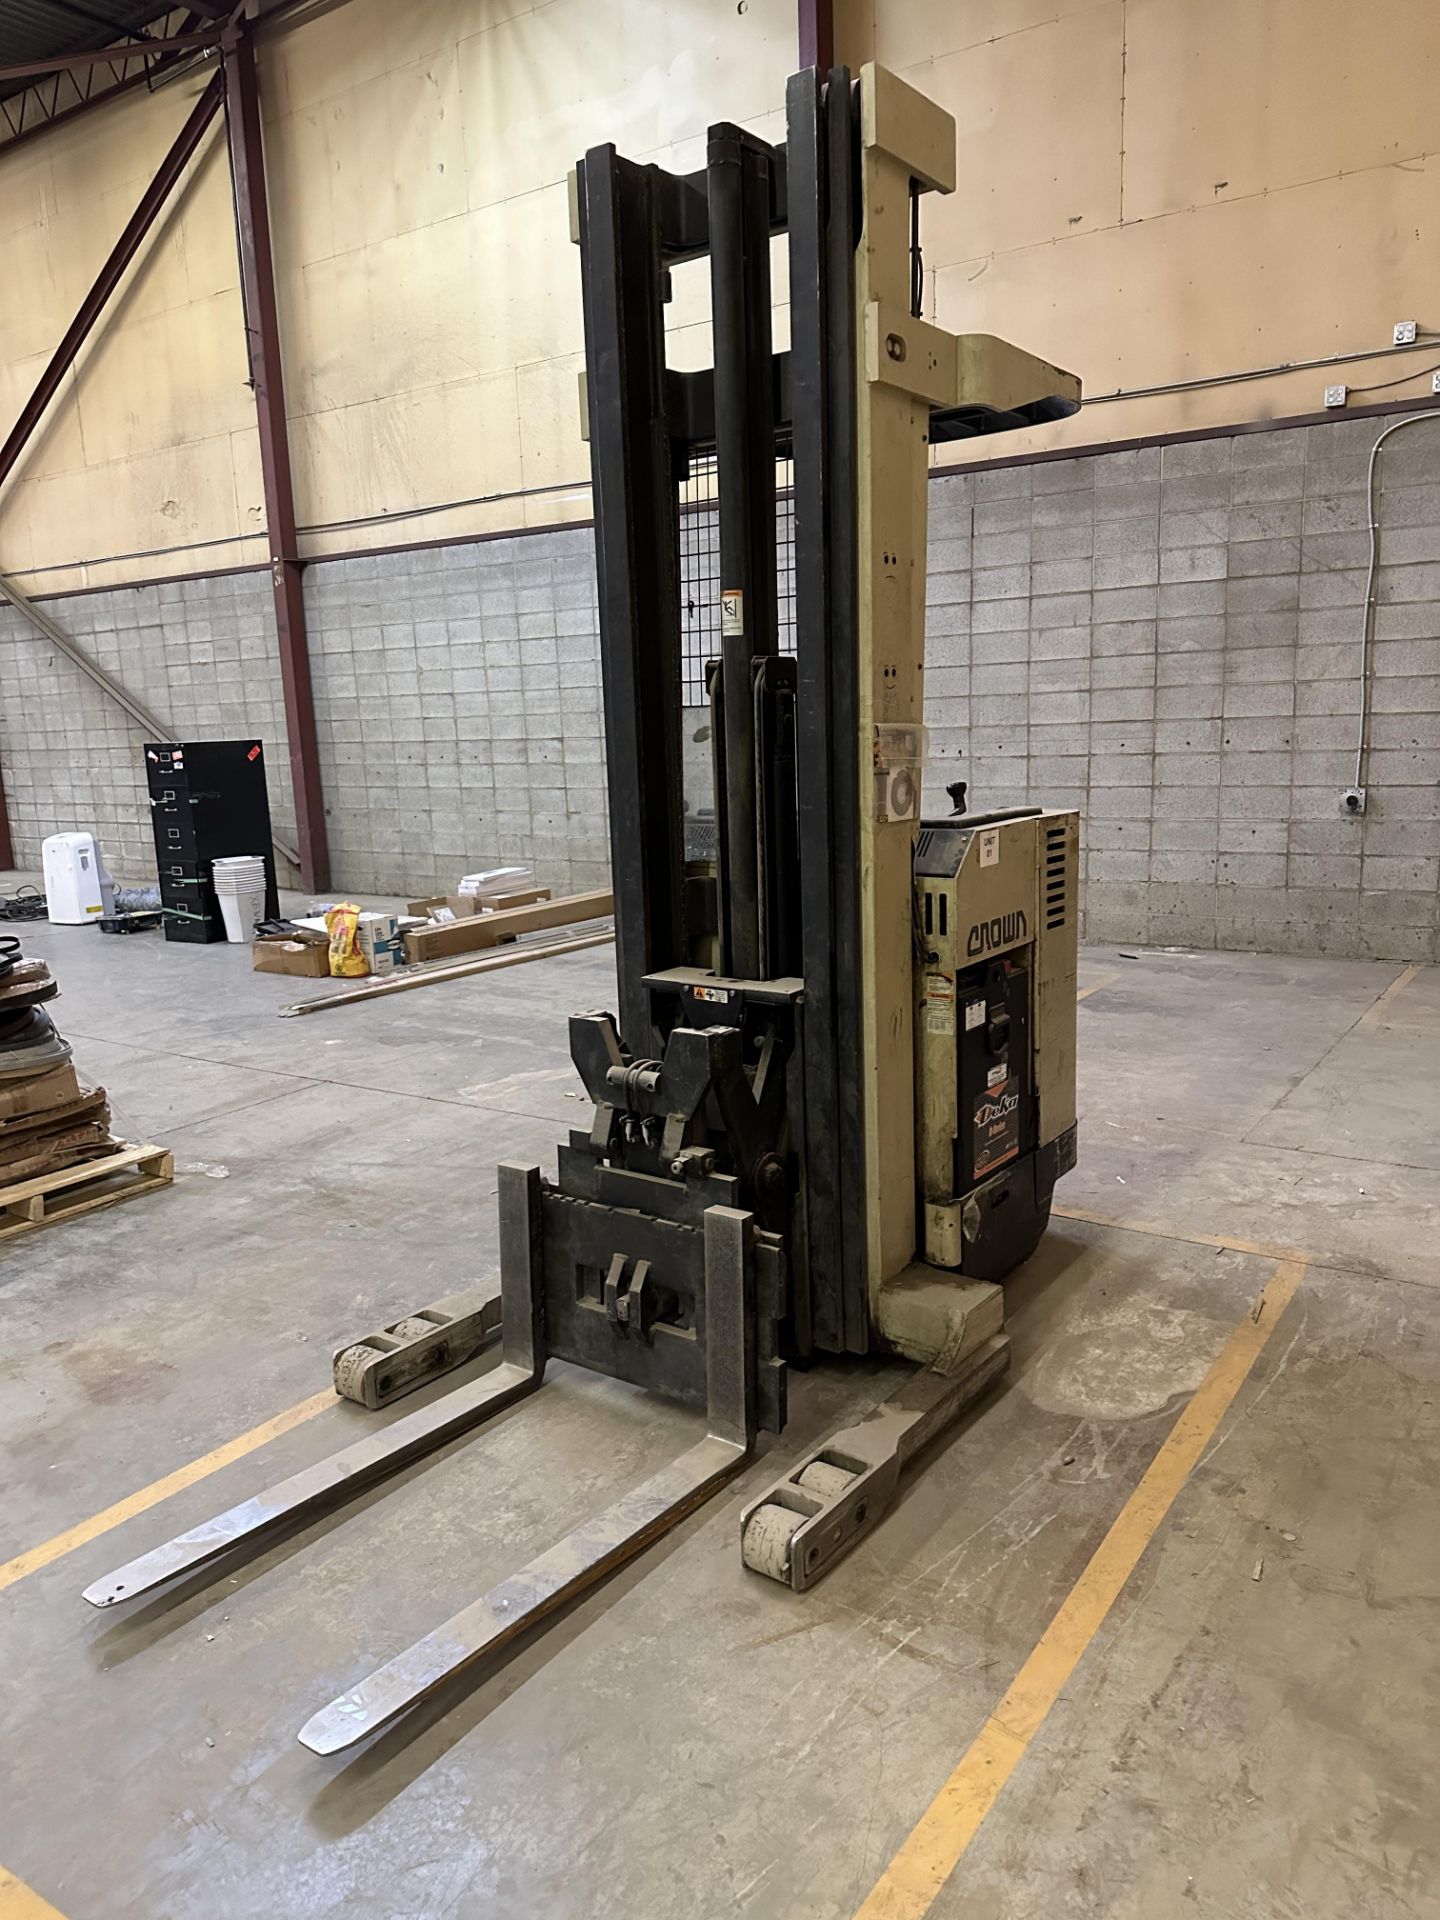 Crown RR 3000 Series Electric Stand-up Forklift ** DOES NOT OPERATE** - Image 5 of 7